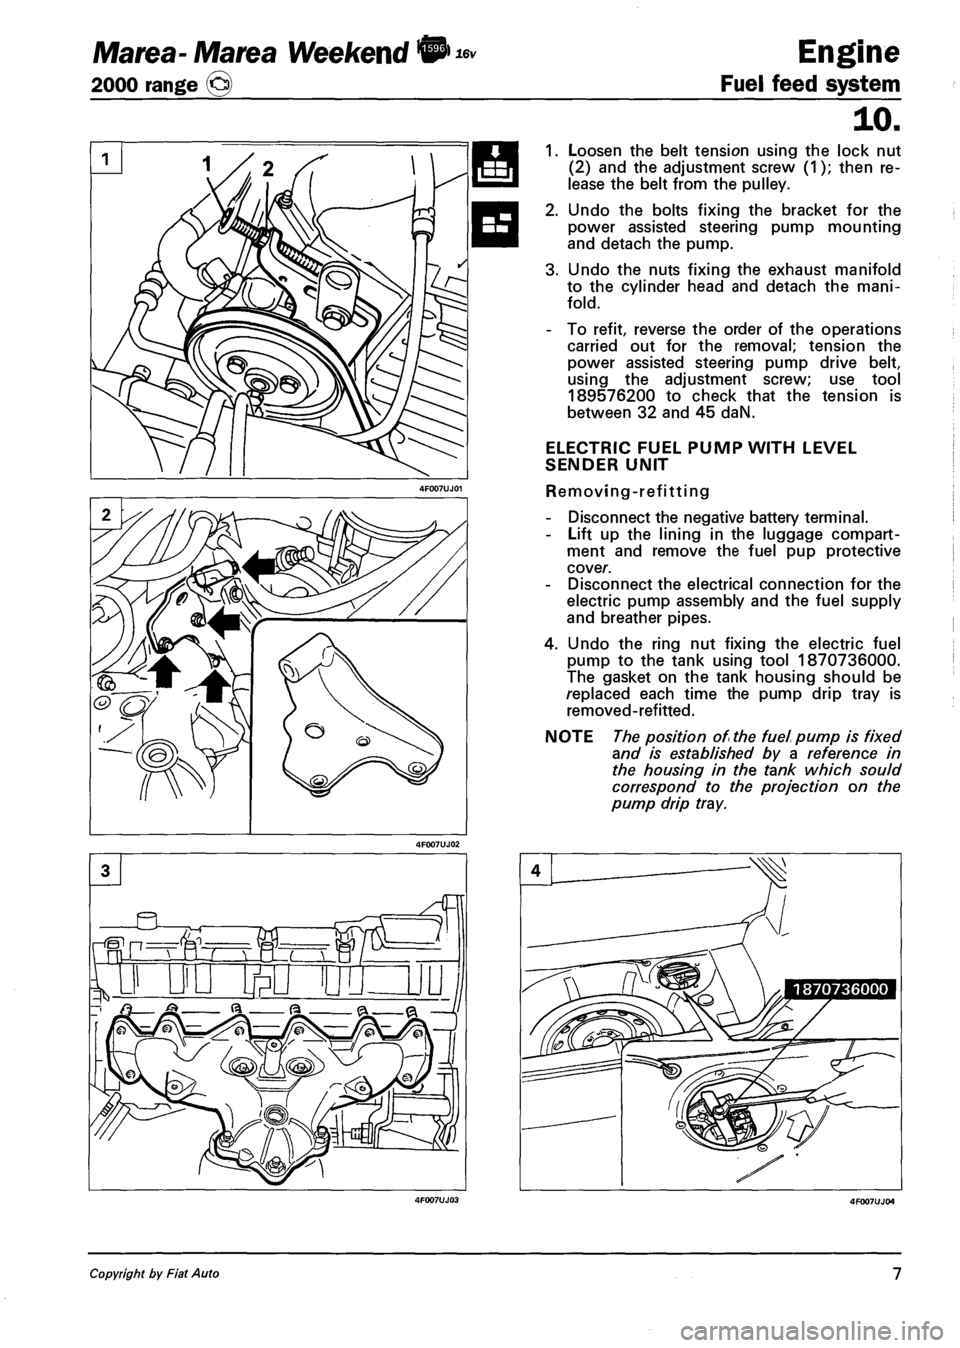 FIAT MAREA 2001 1.G Workshop Manual Marea- Marea Weekend • 
2000 range © 
16v Engine 
Fuel feed system 
10. 
1. Loosen the belt tension using the lock nut 
(2) and the adjustment screw (1); then re­
lease the belt from the pulley. 
